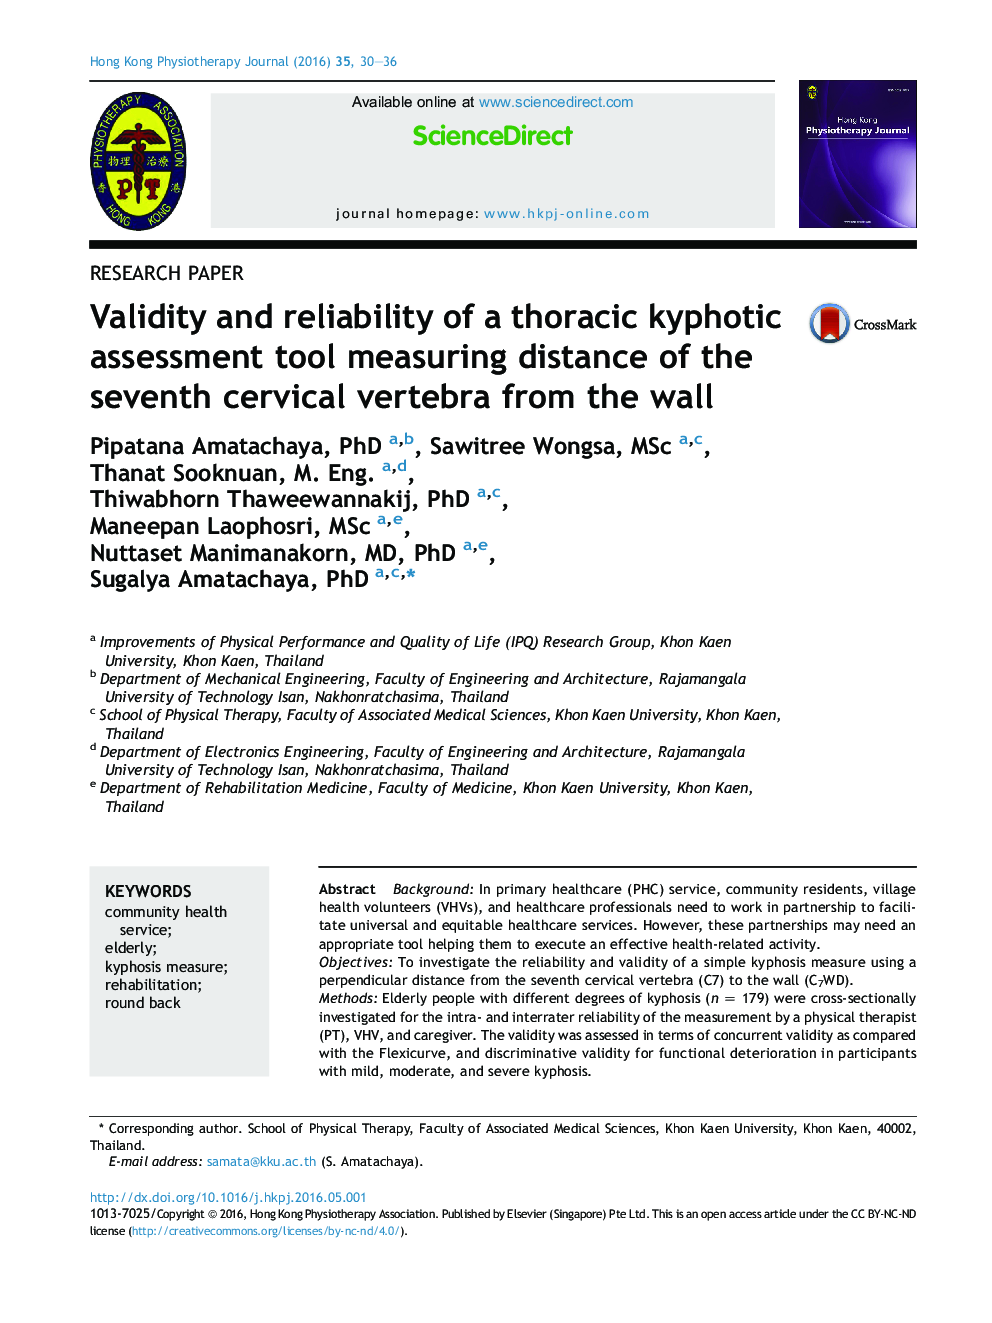 Validity and reliability of a thoracic kyphotic assessment tool measuring distance of the seventh cervical vertebra from the wall